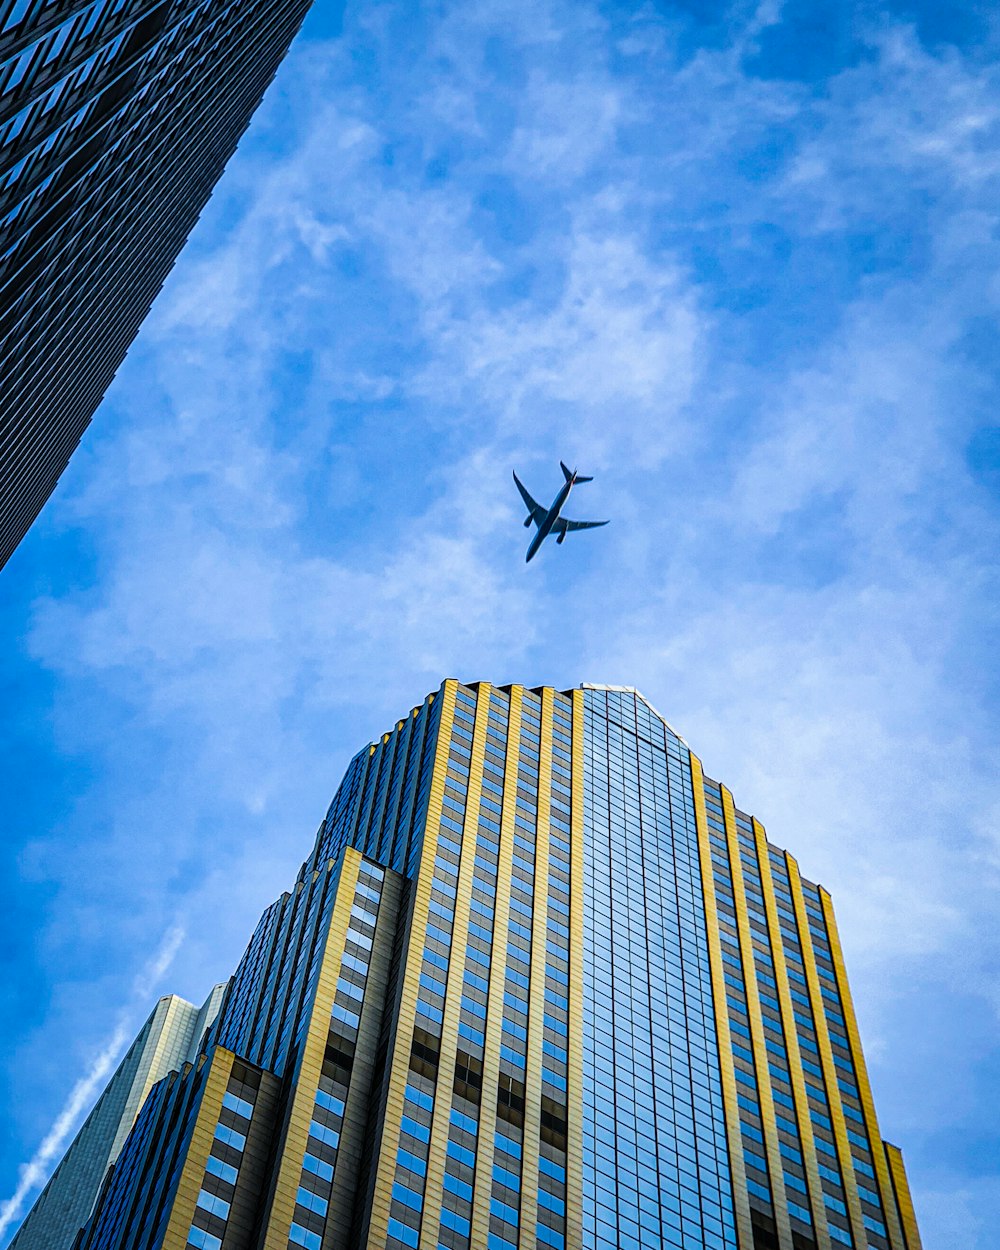 airplane flying over high rise building during daytime